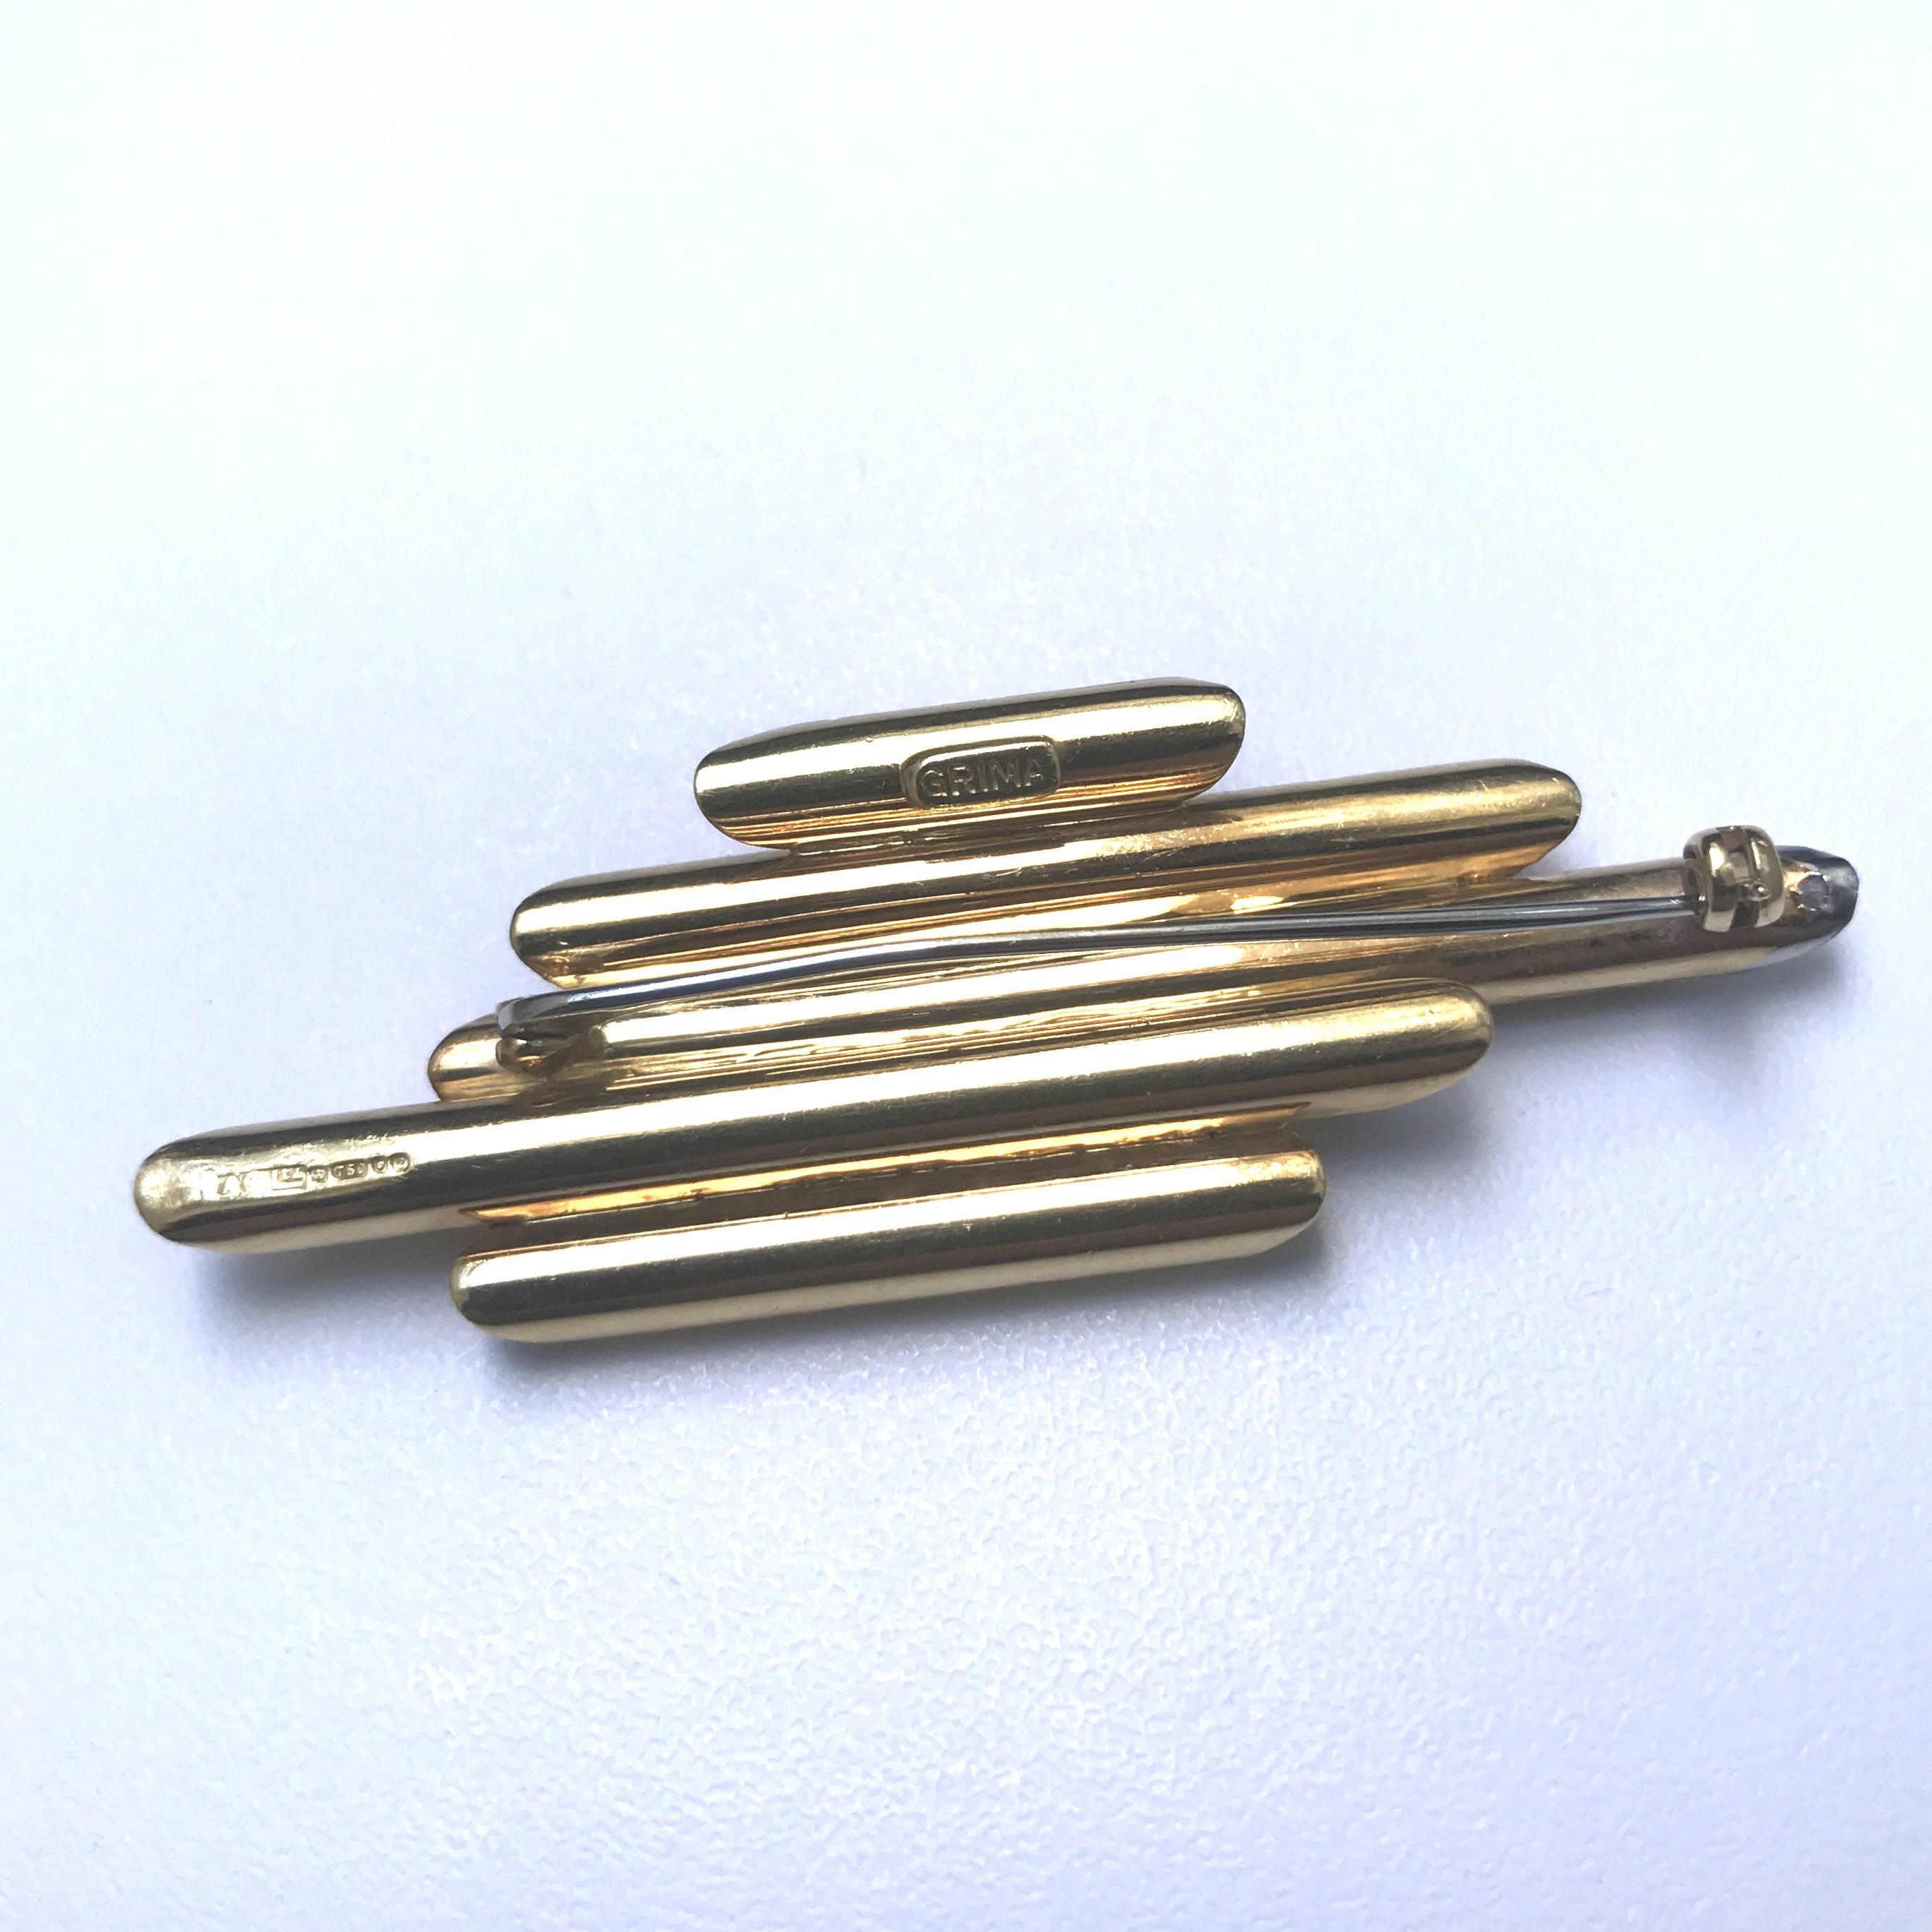 Designed by Andrew Grima in 1977
This brooch features textured gold tubes of varying lengths, one set with brilliant cut diamonds. Signed GRIMA, London hallmarks for 1977

About Grima
Andrew Grima was one of a handful of British designers who